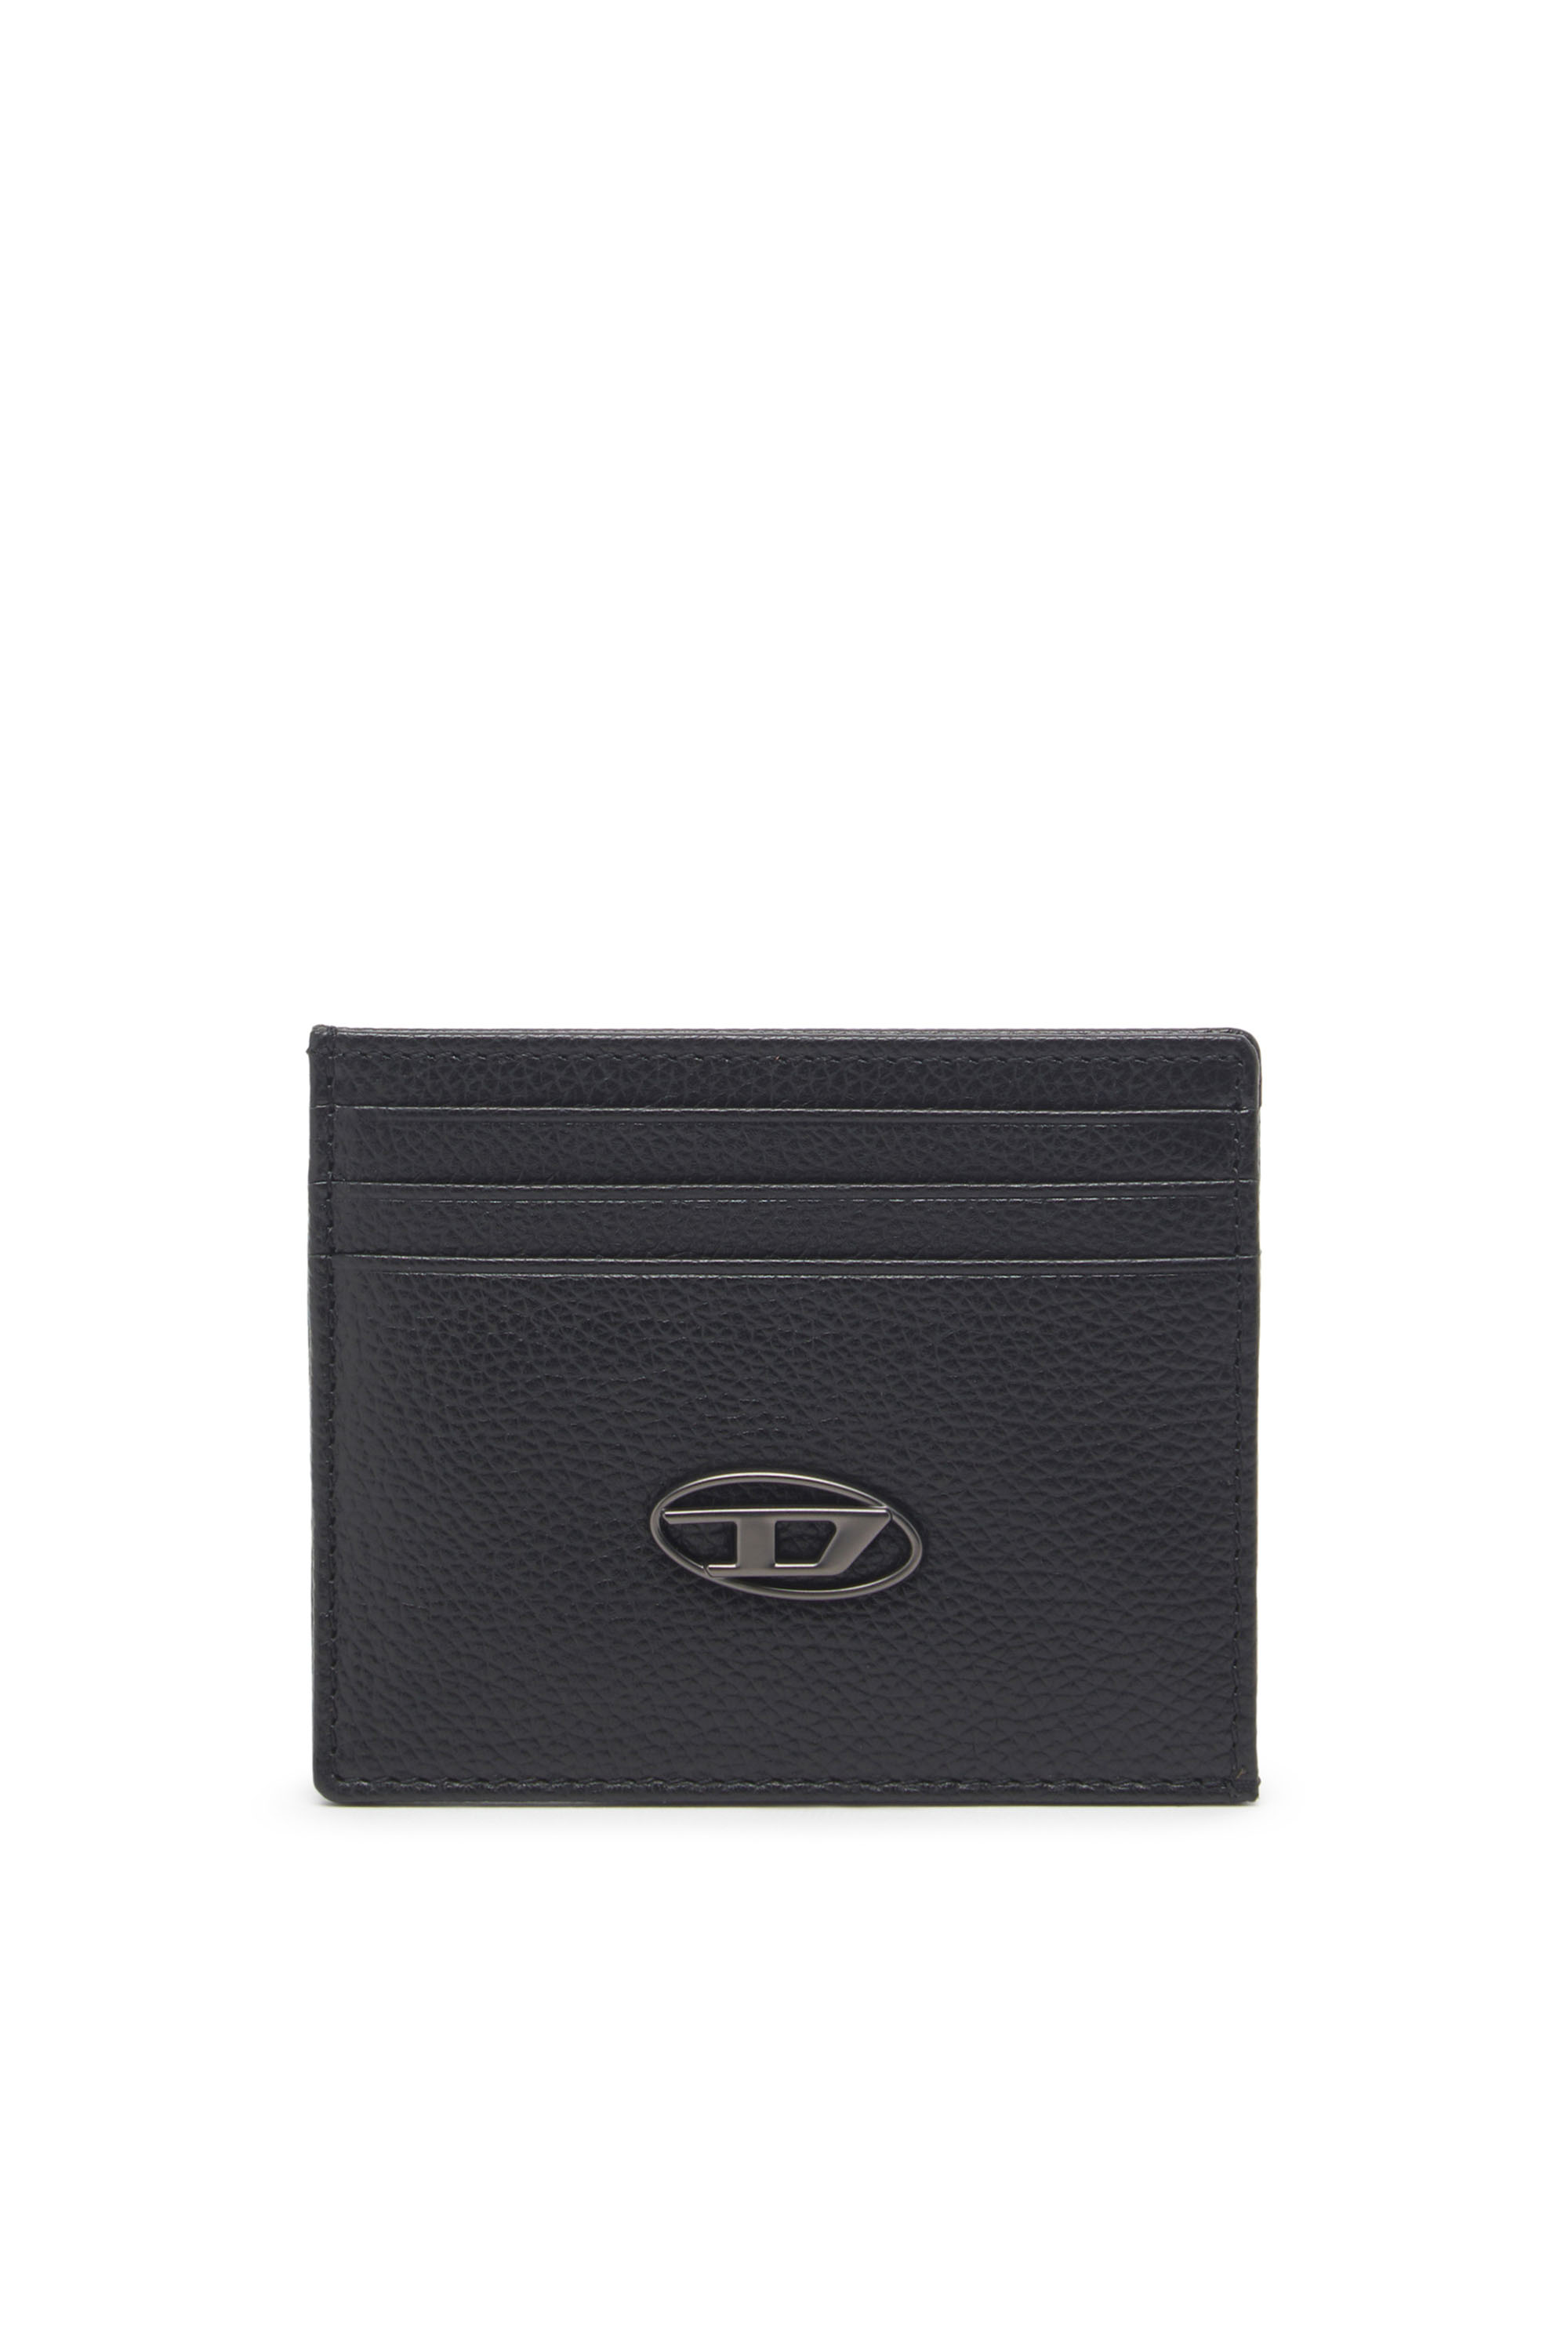 Diesel - Card case in grained leather - Small Wallets - Man - Black